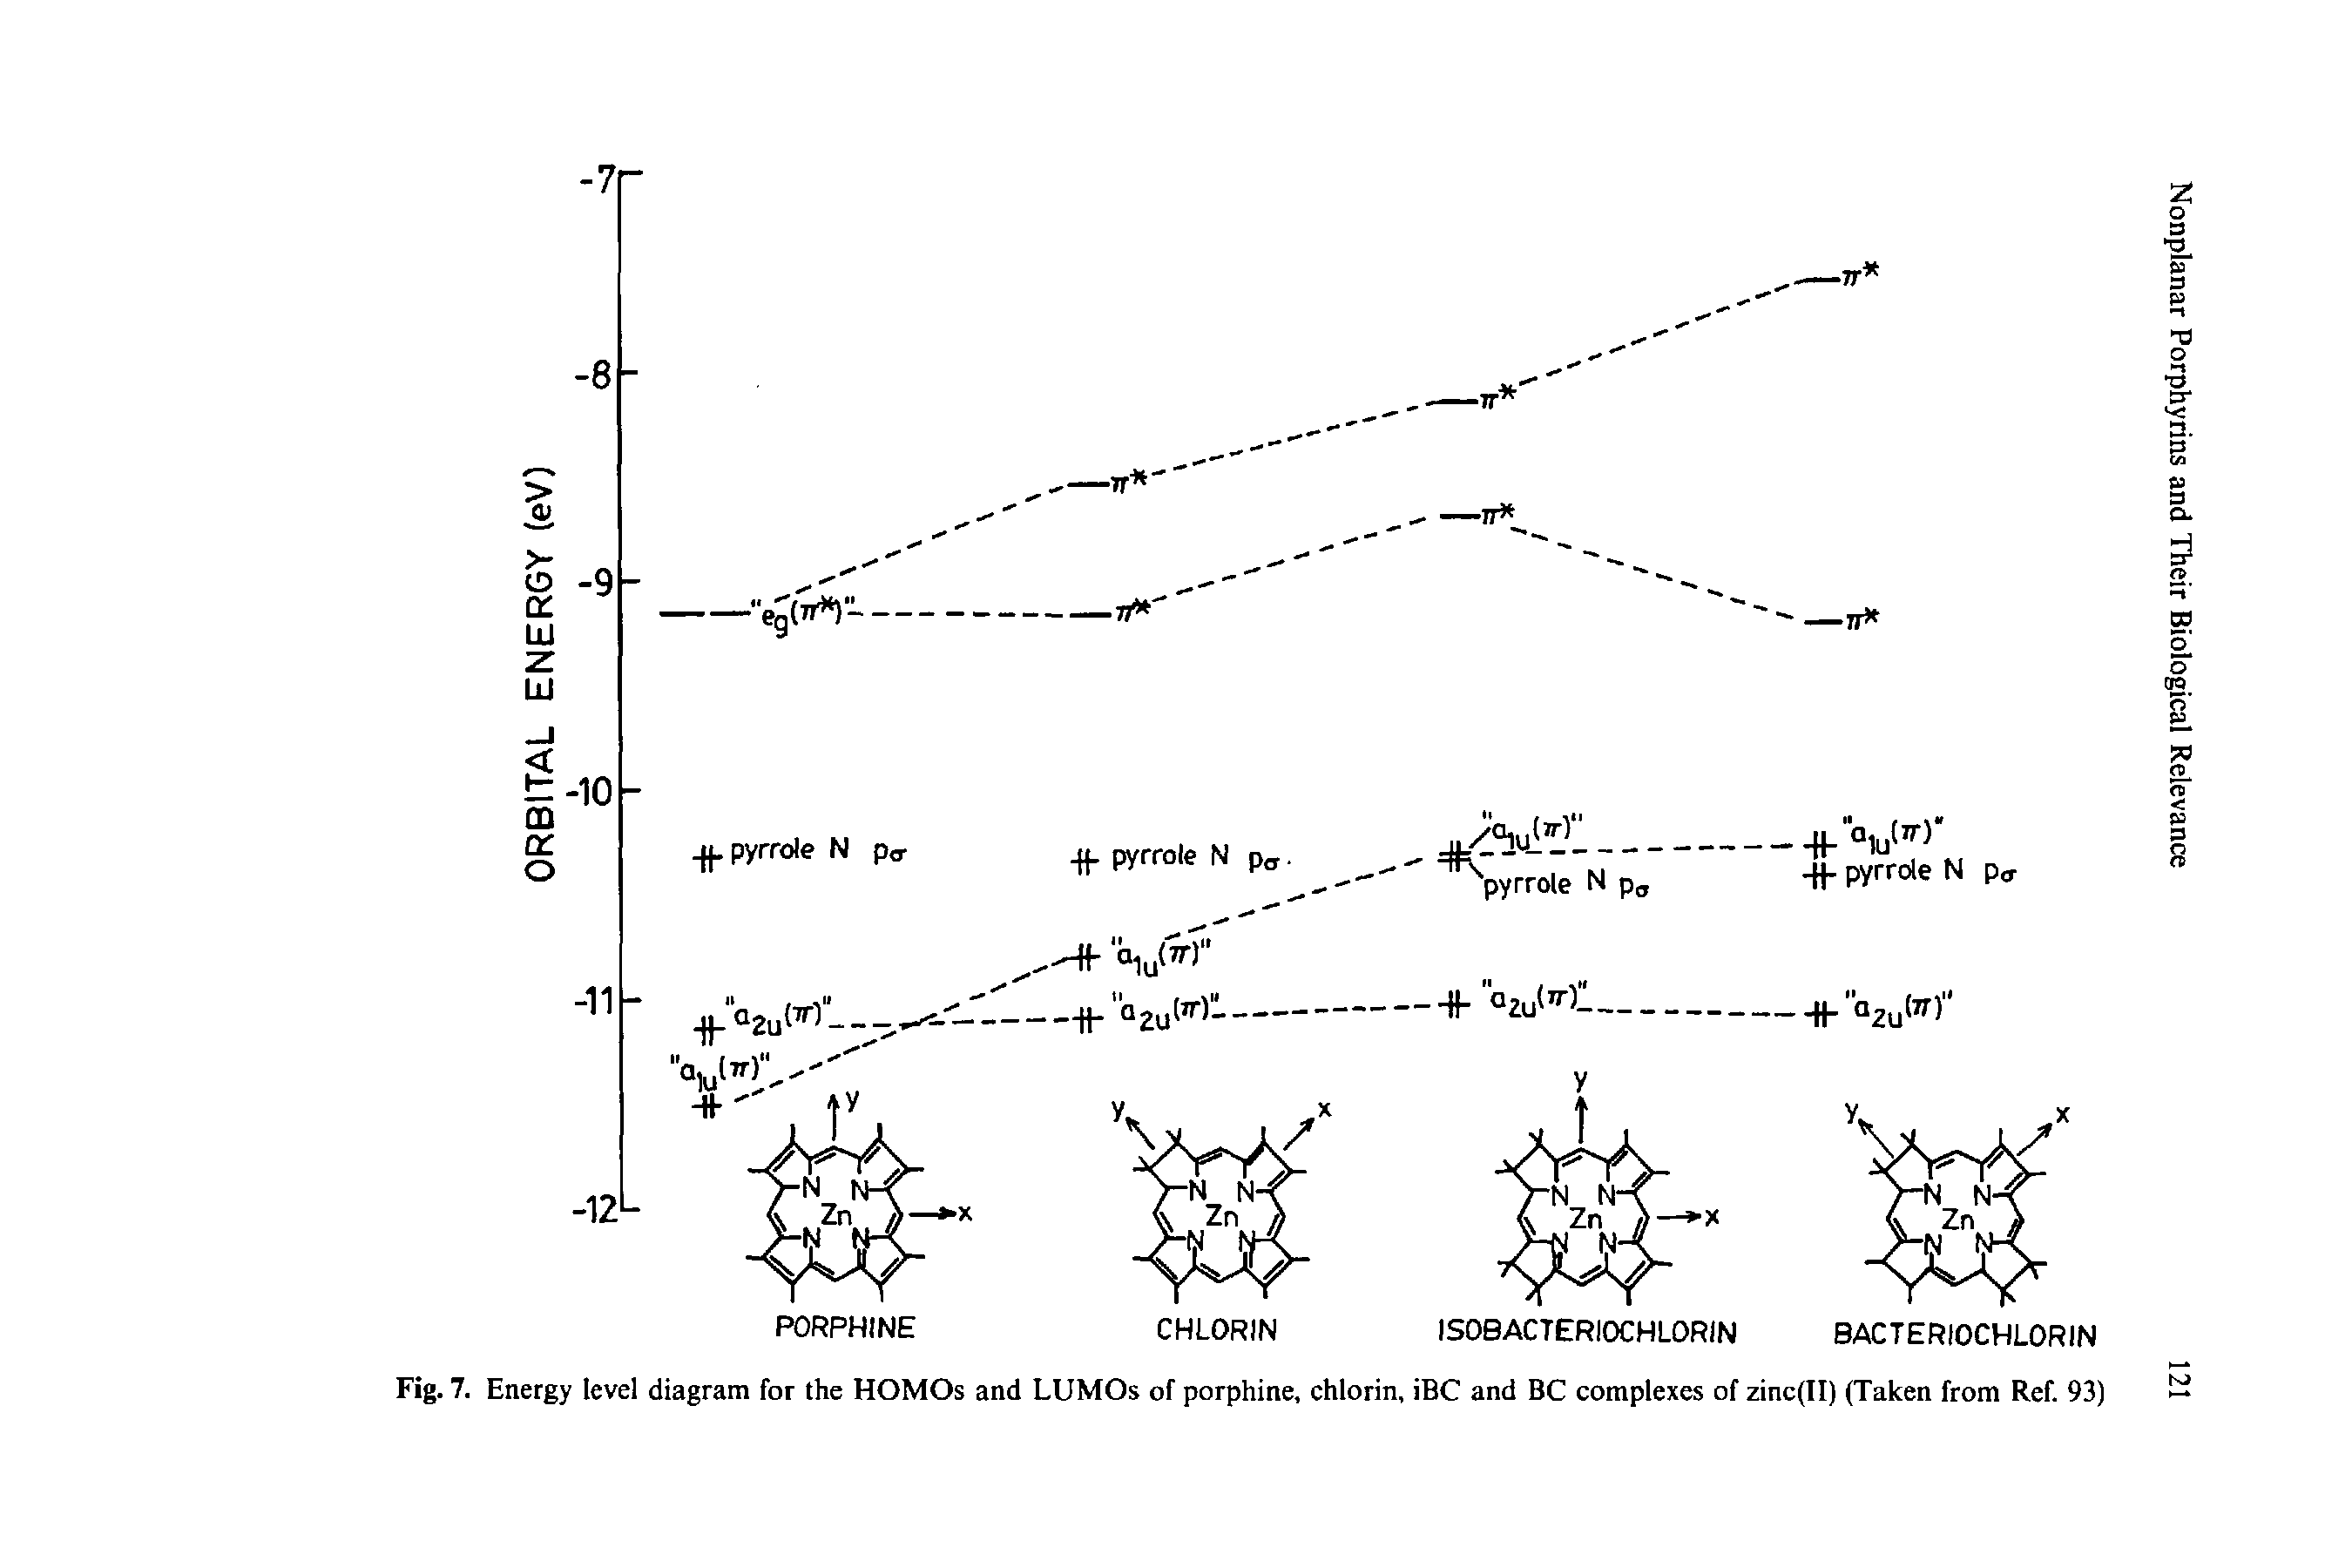 Fig. 7. Energy level diagram for the HOMOs and LUMOs of porphine, chlorin, iBC and BC complexes of zinc(II) (Taken from Ref. 93)...